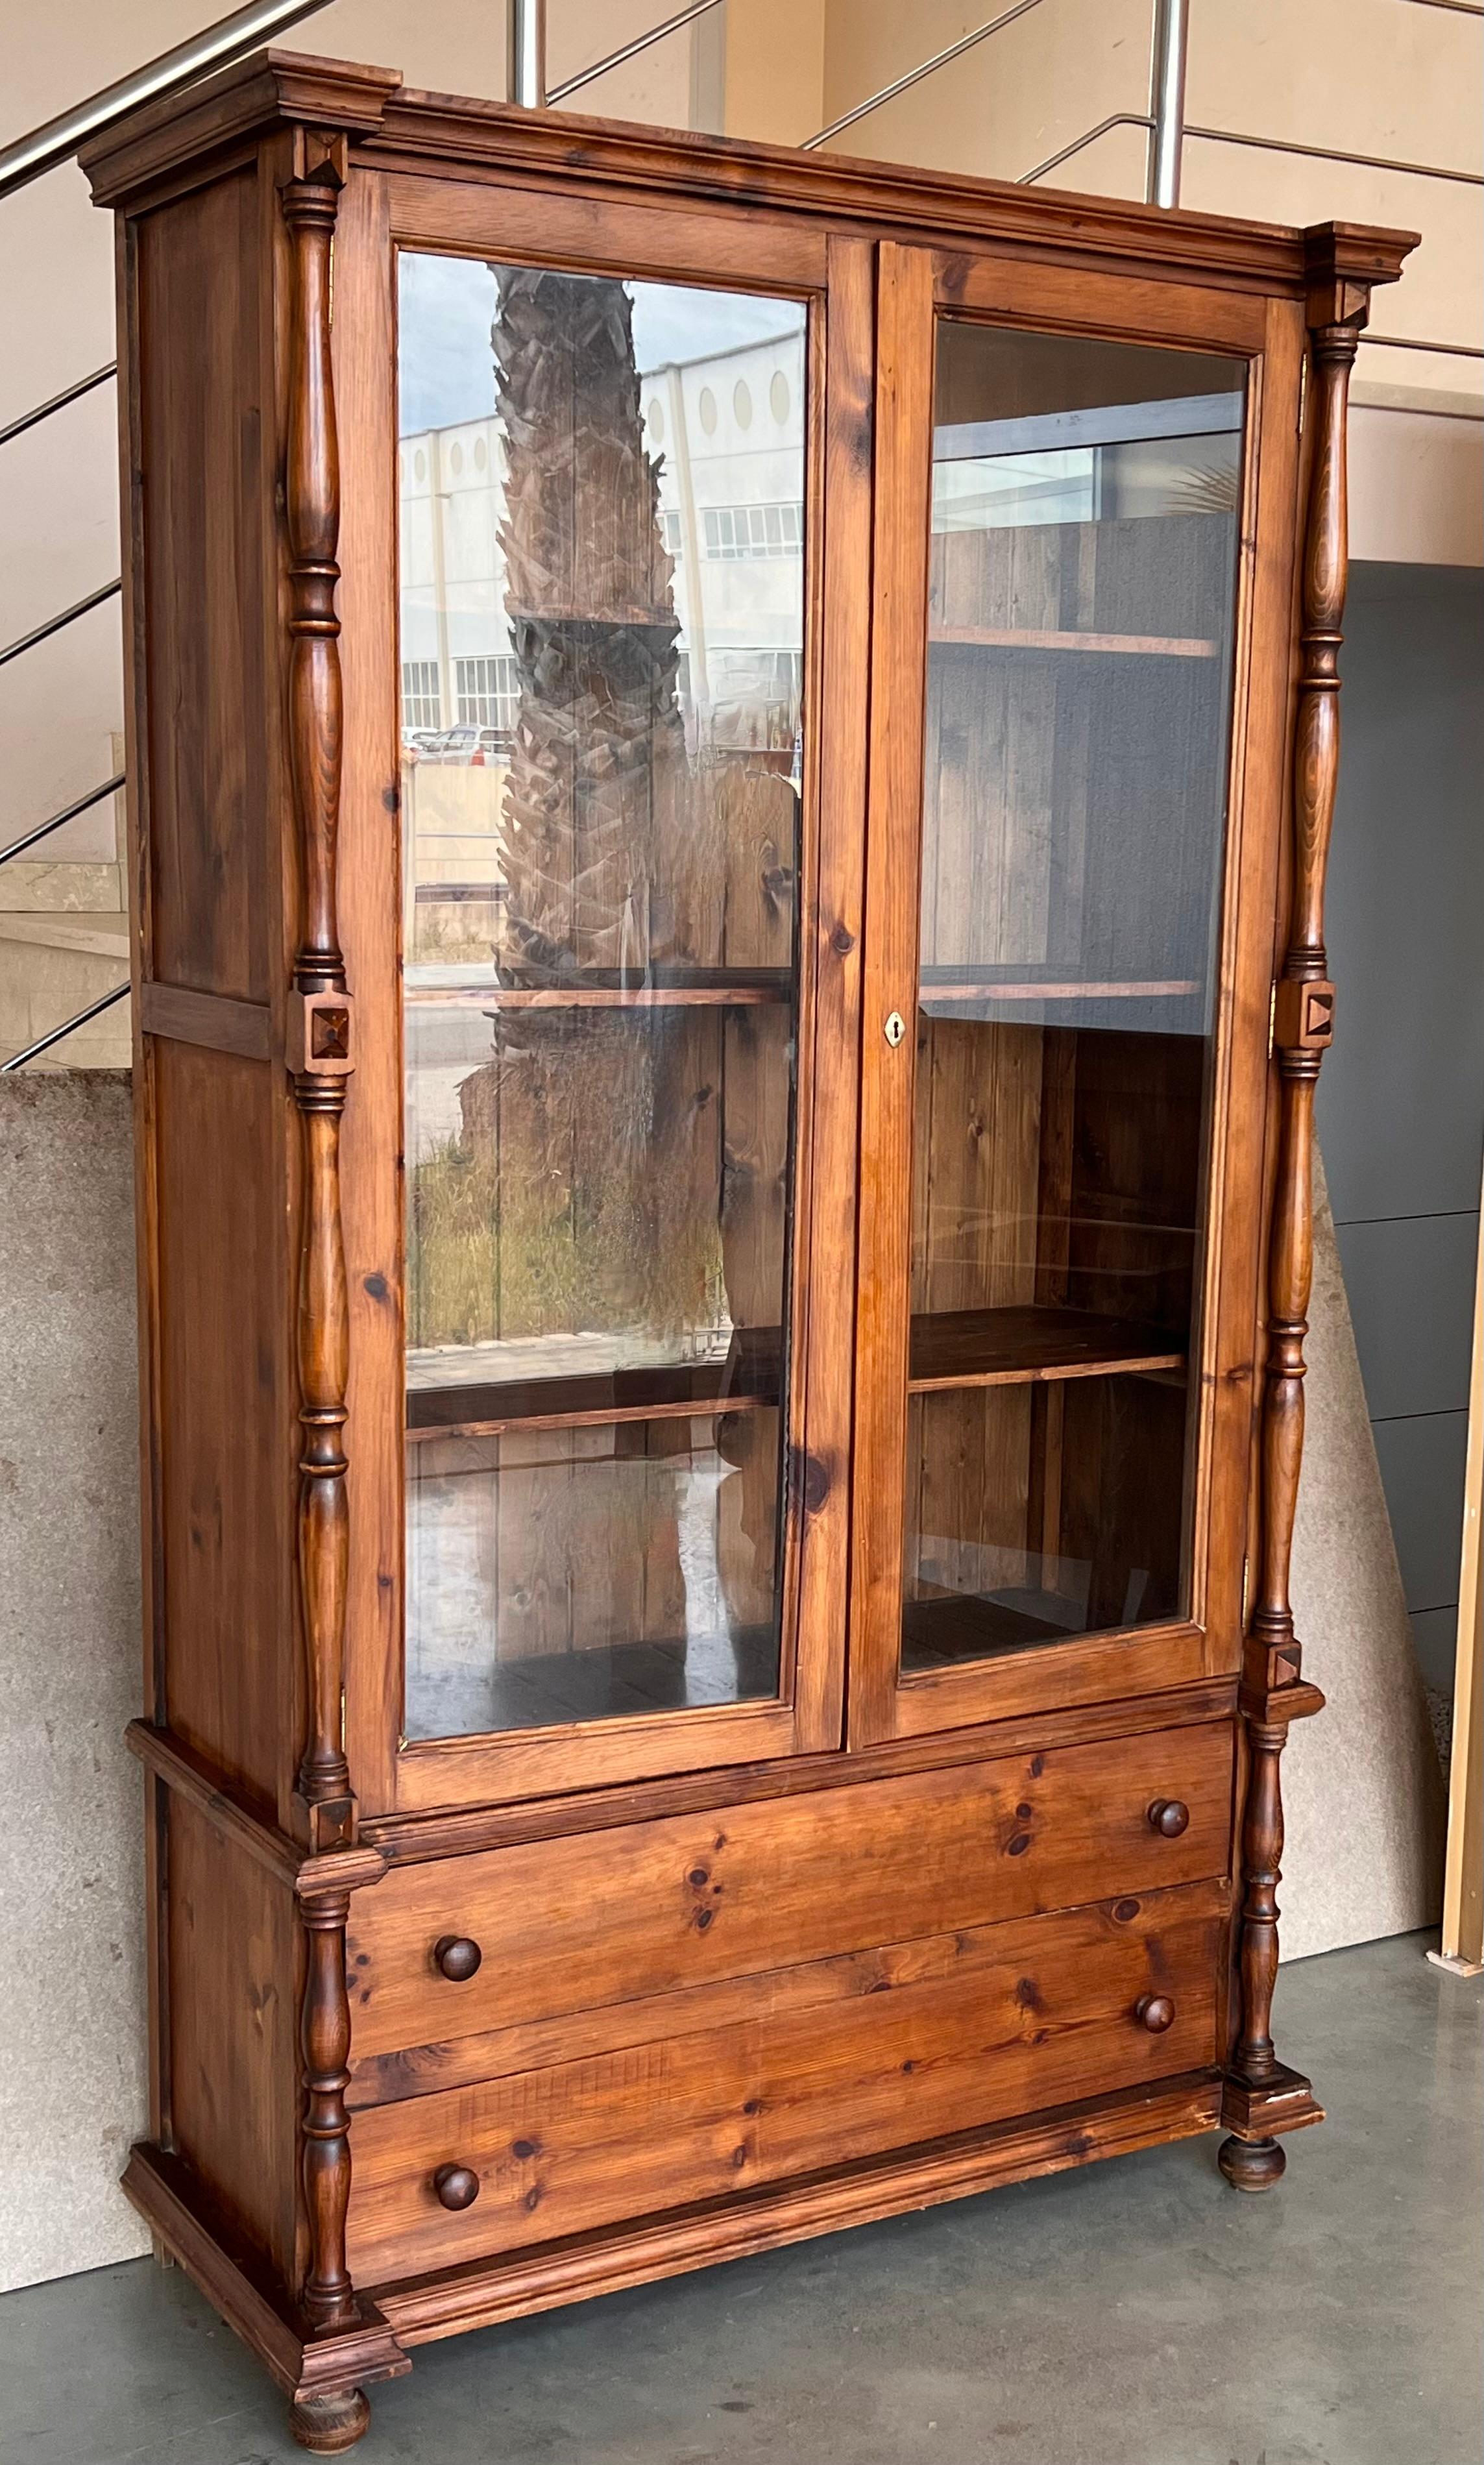 19th century Spanish cupboard or bookcase with glass vitrine, constructed from a pine called 